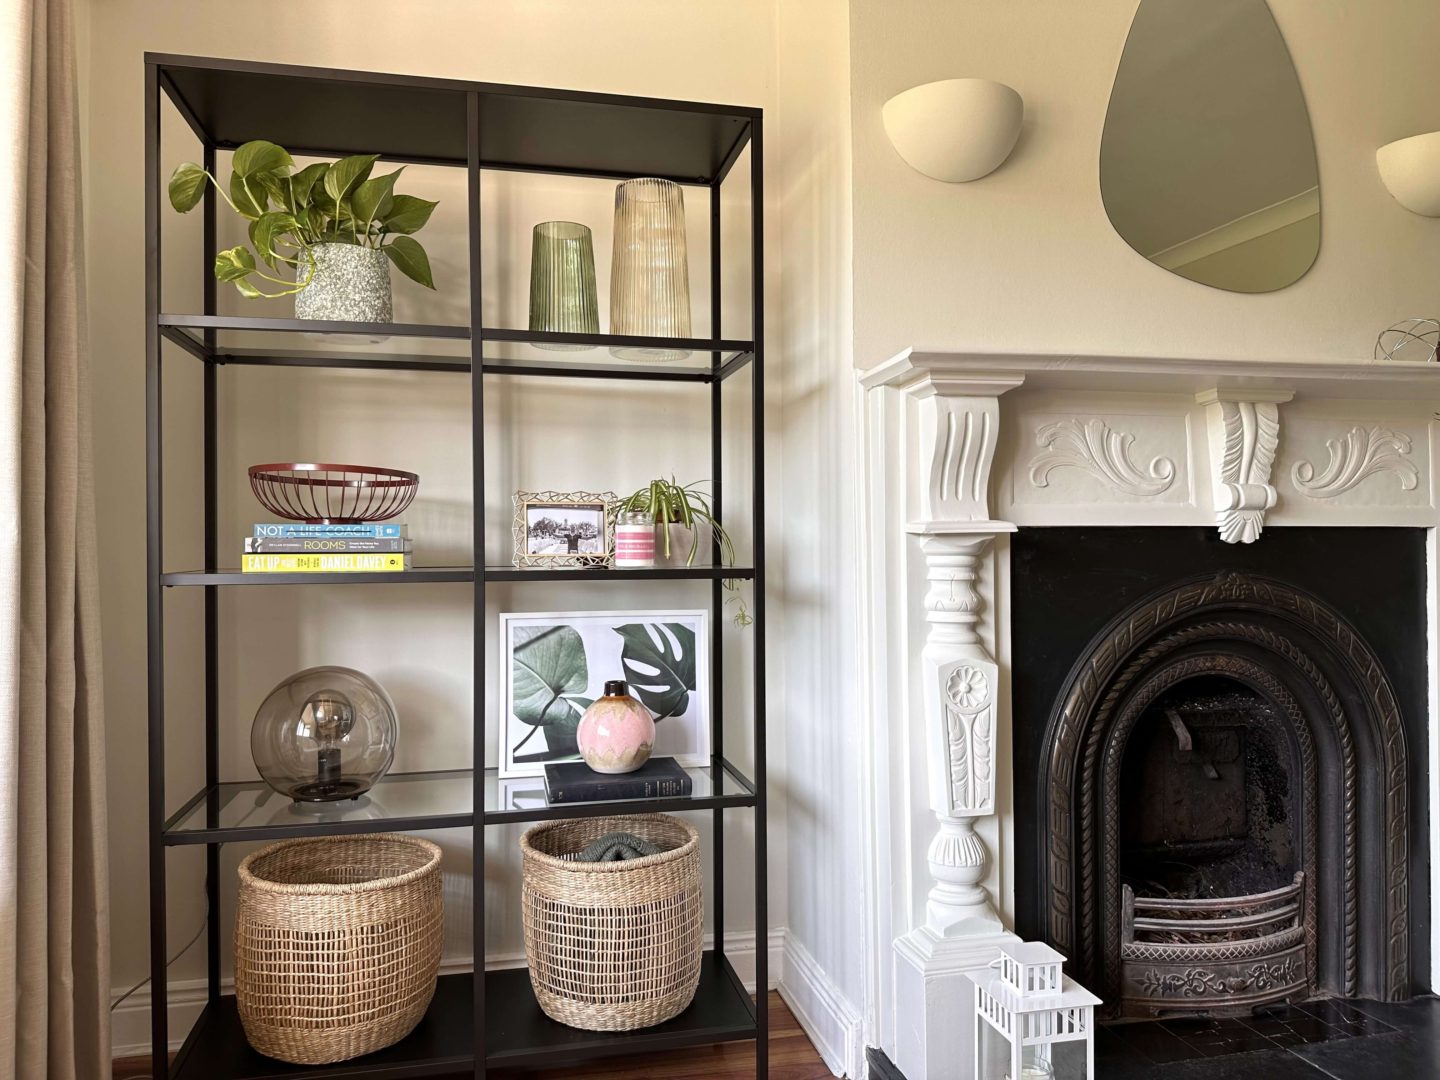 5 THINGS YOU ALWAYS NEED TO STYLE A SHELF!